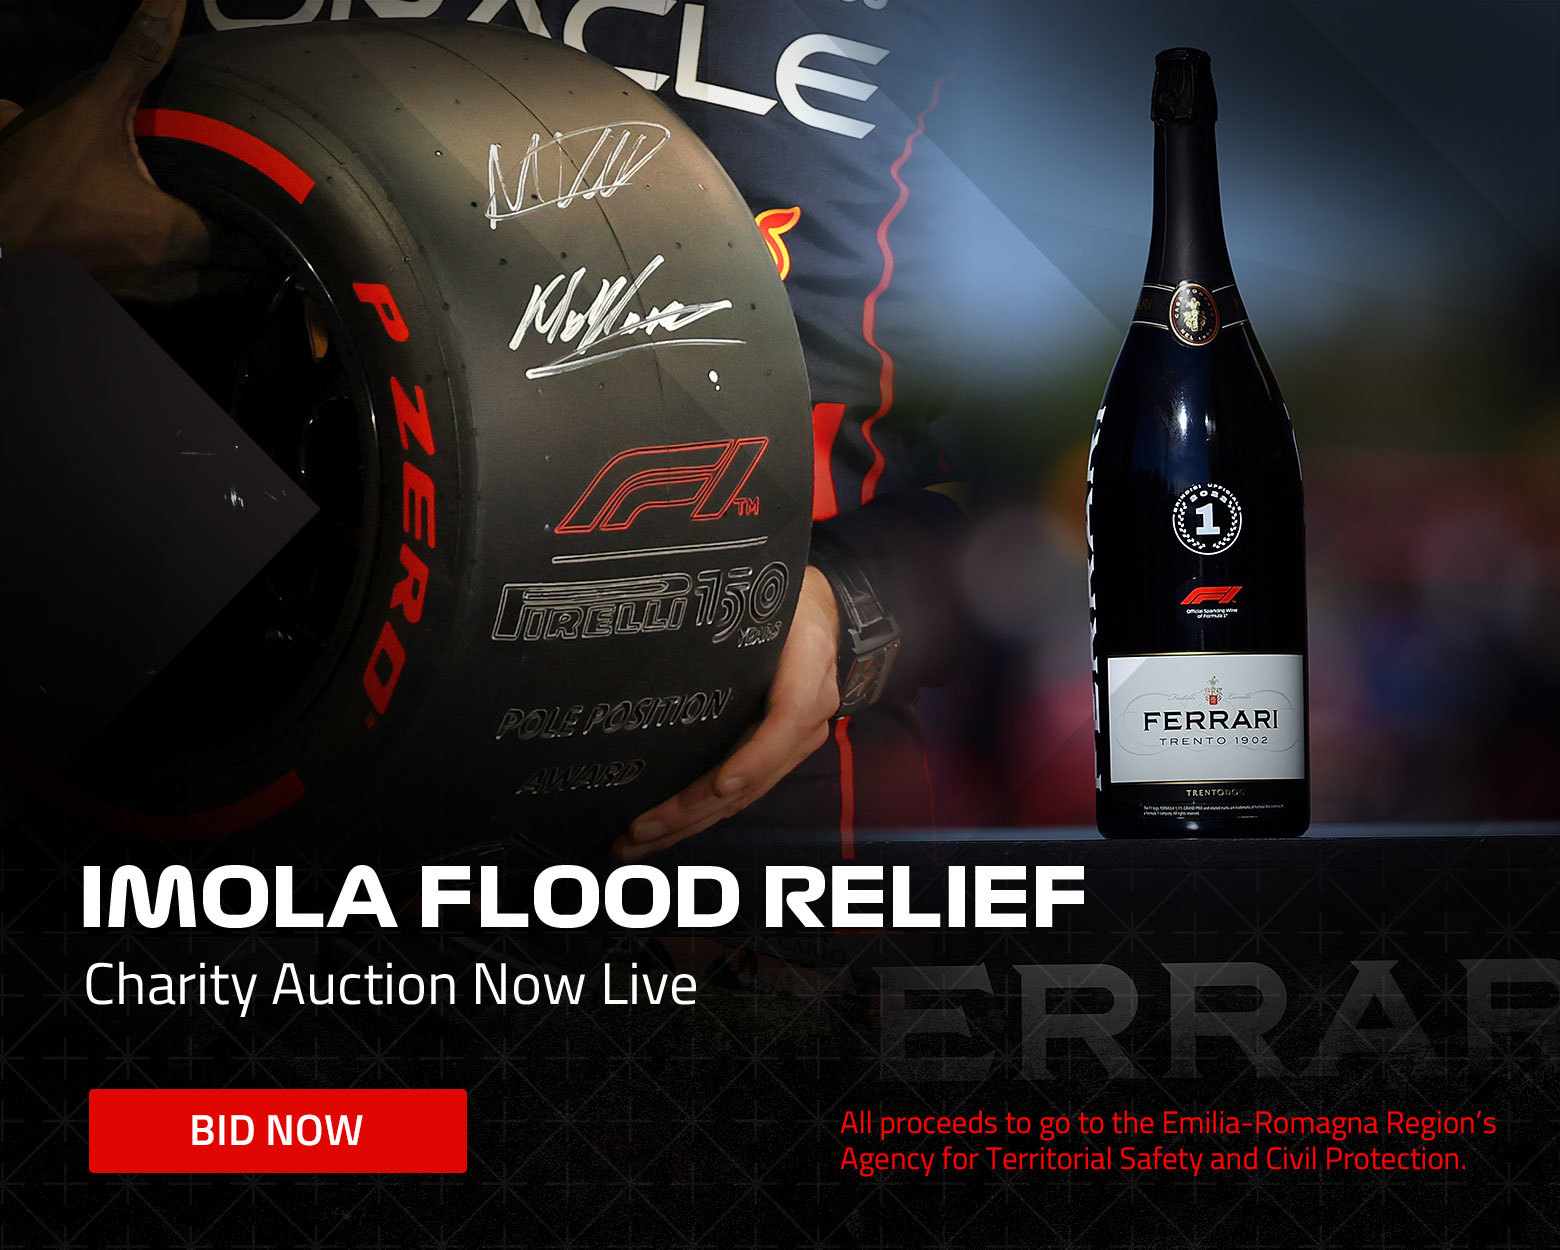 27.05.23 IMOLA AWARDS, an autographed bottle of Ferrari Trento sold by F1 originals to raise money for the floods in Emilia-Romagna